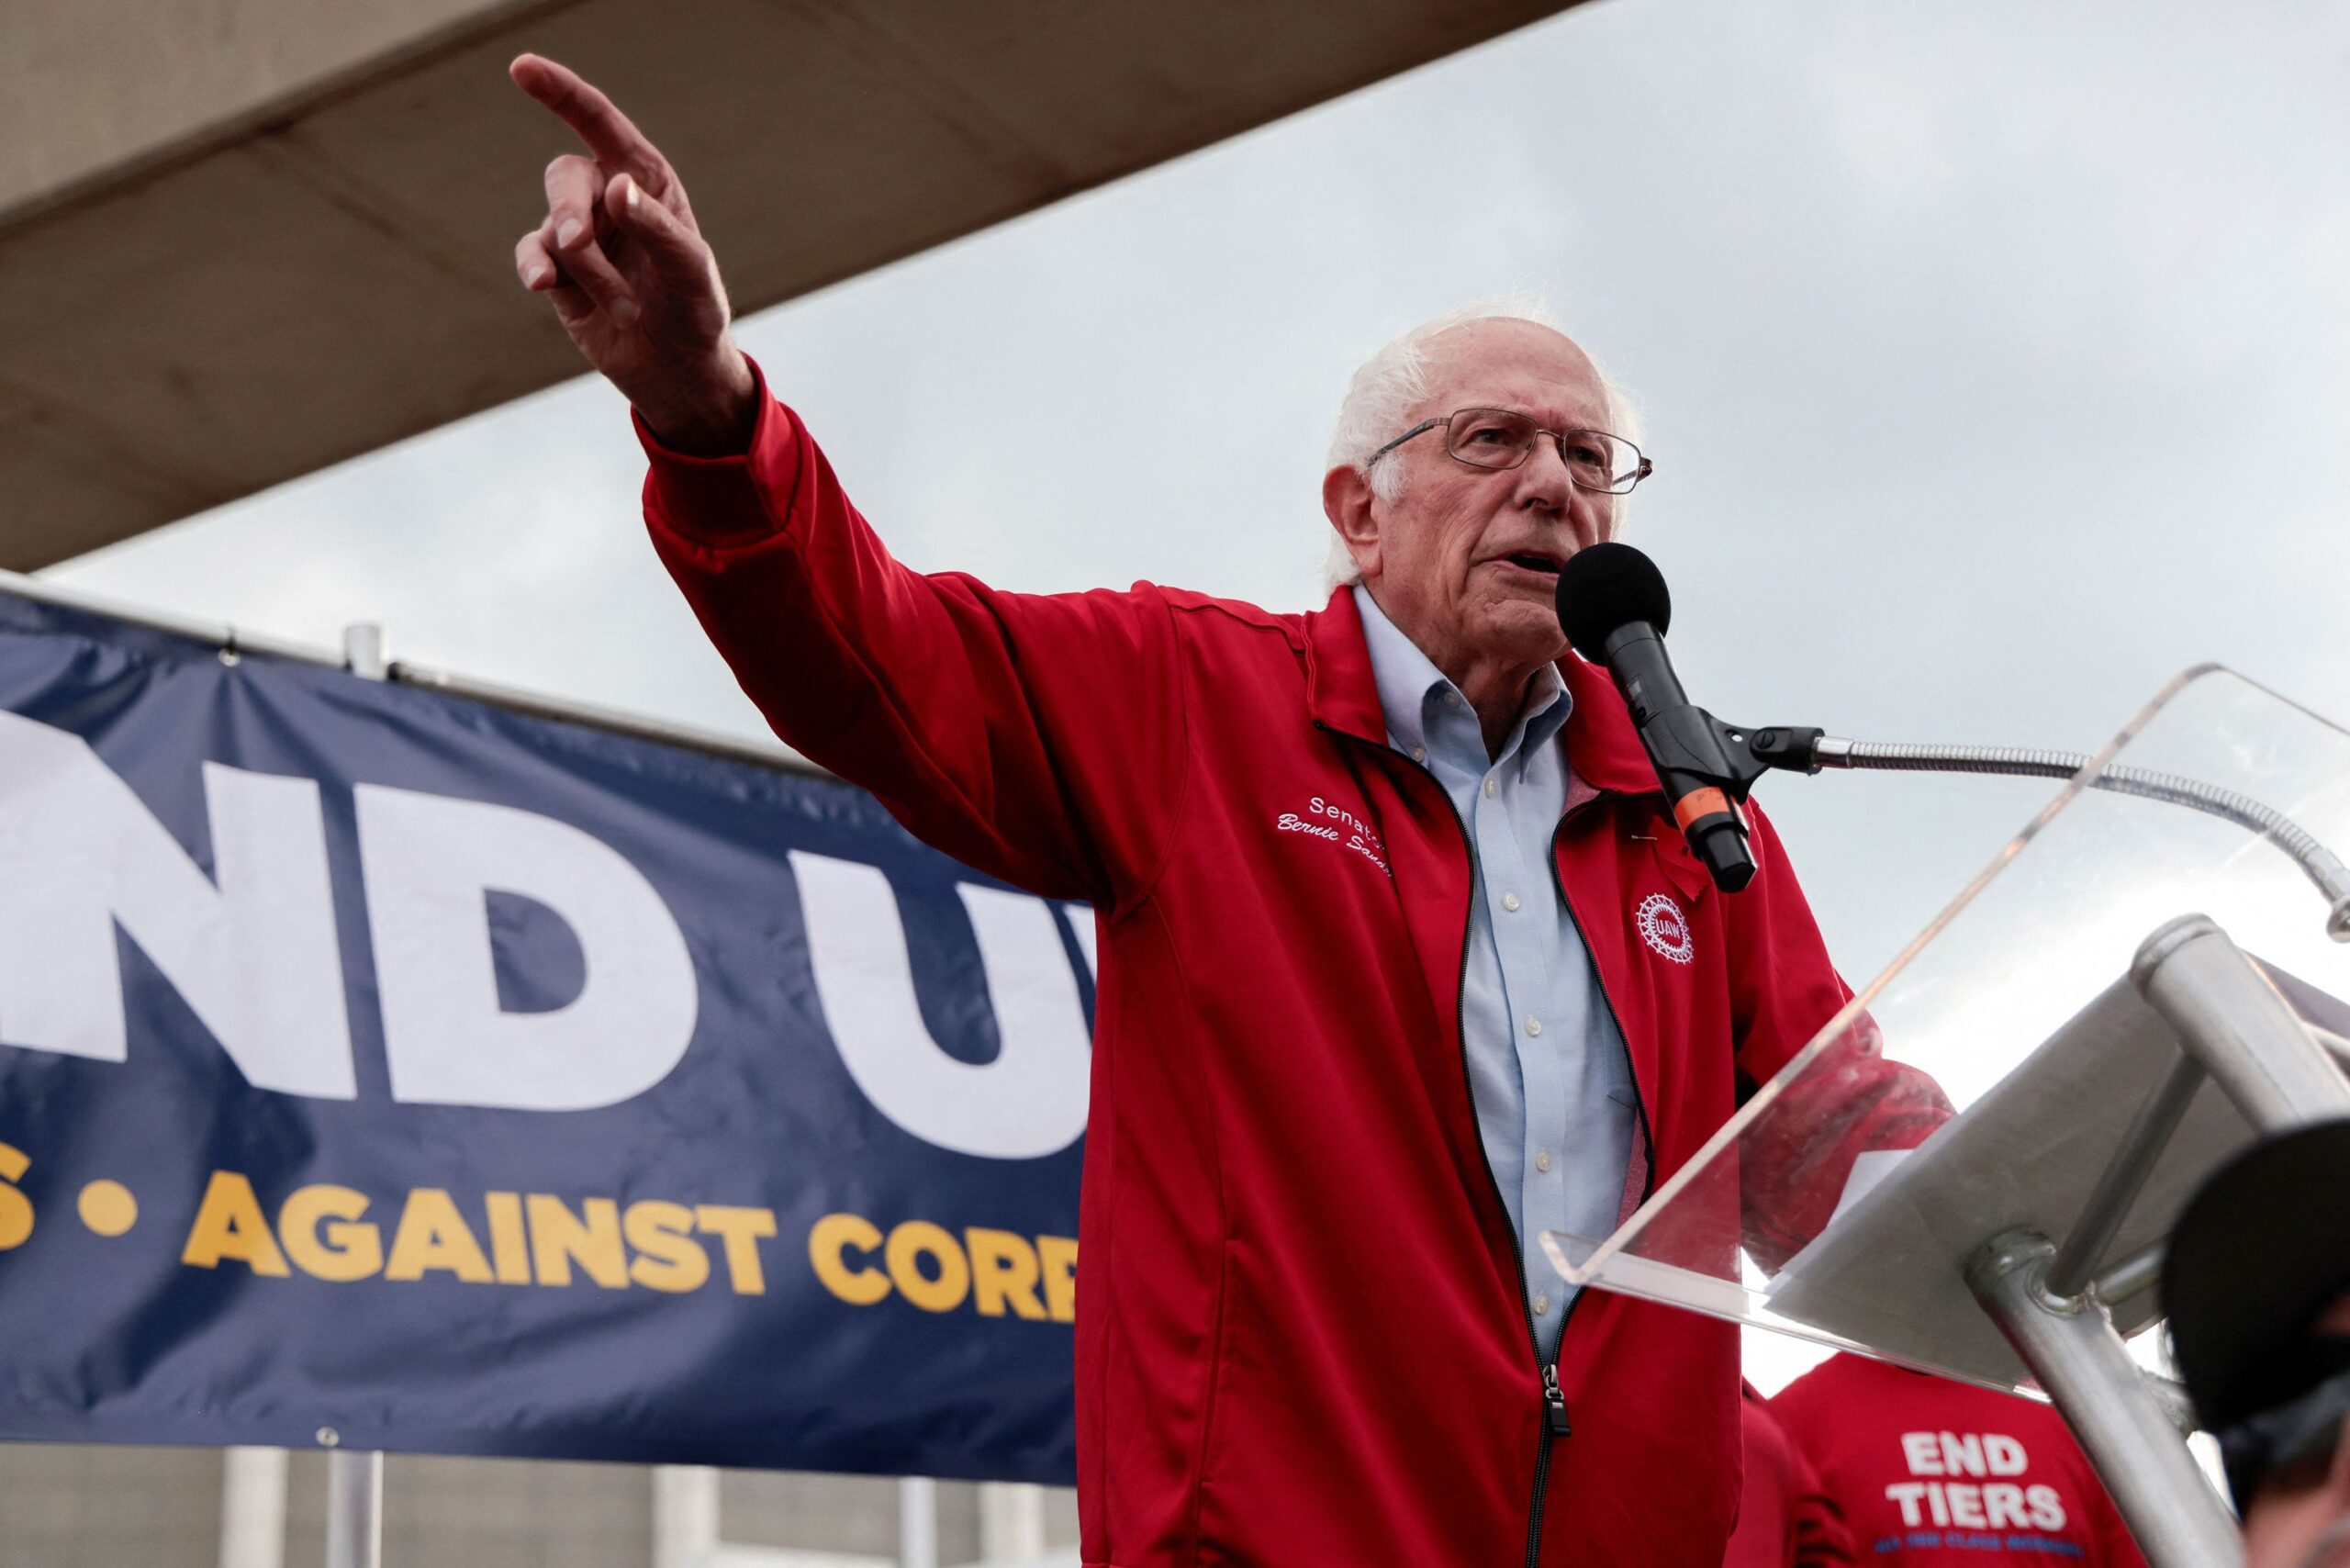 Senator Bernie Sanders addresses the audience during a rally in support of striking United Auto Wor...